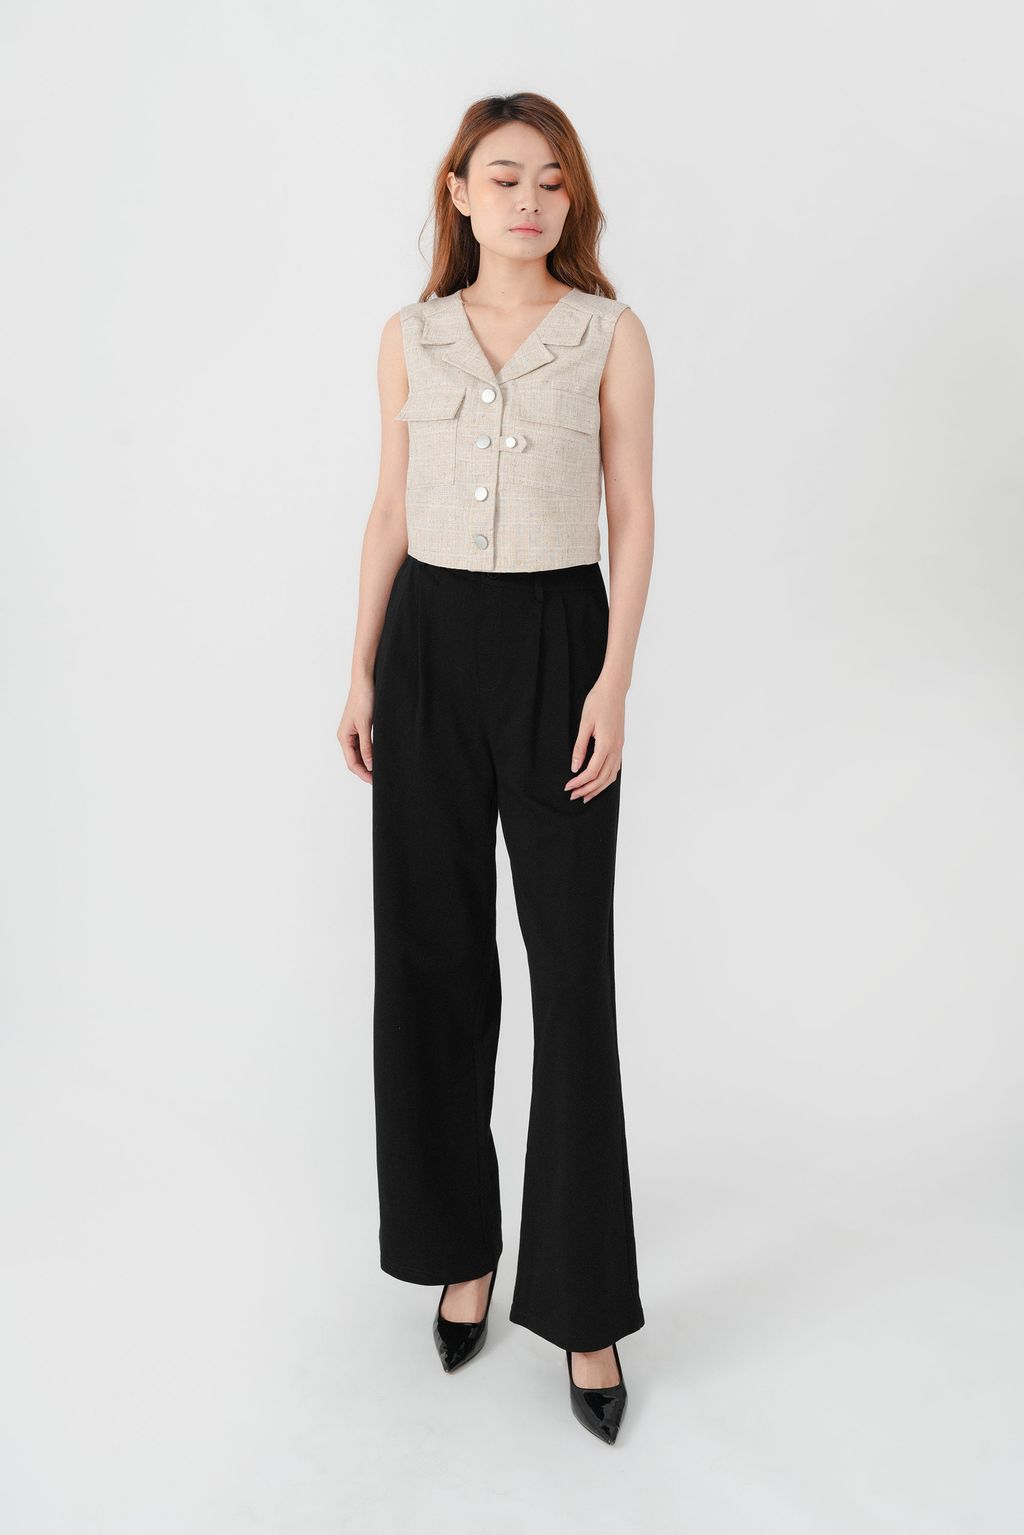 Carey Cotton Relaxed Fit Pants1